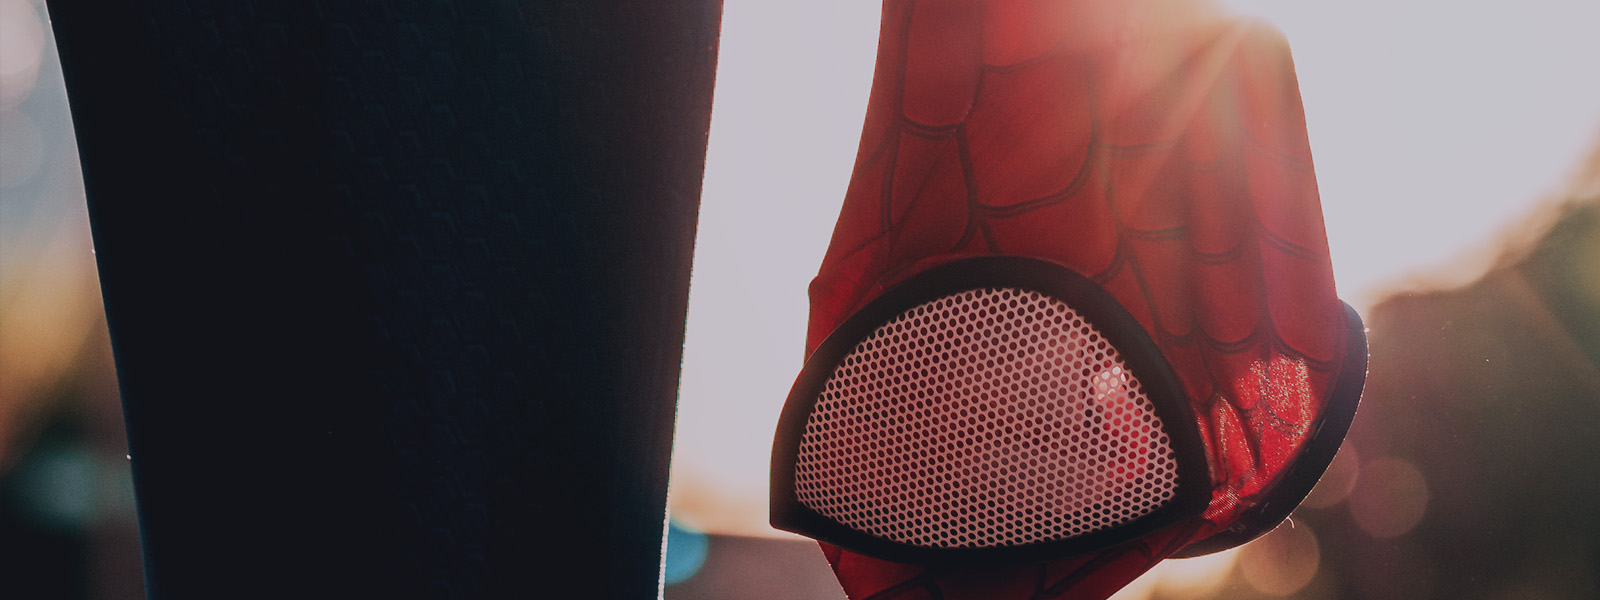 What Real Estate Brokerages Can Learn from Spider-Man